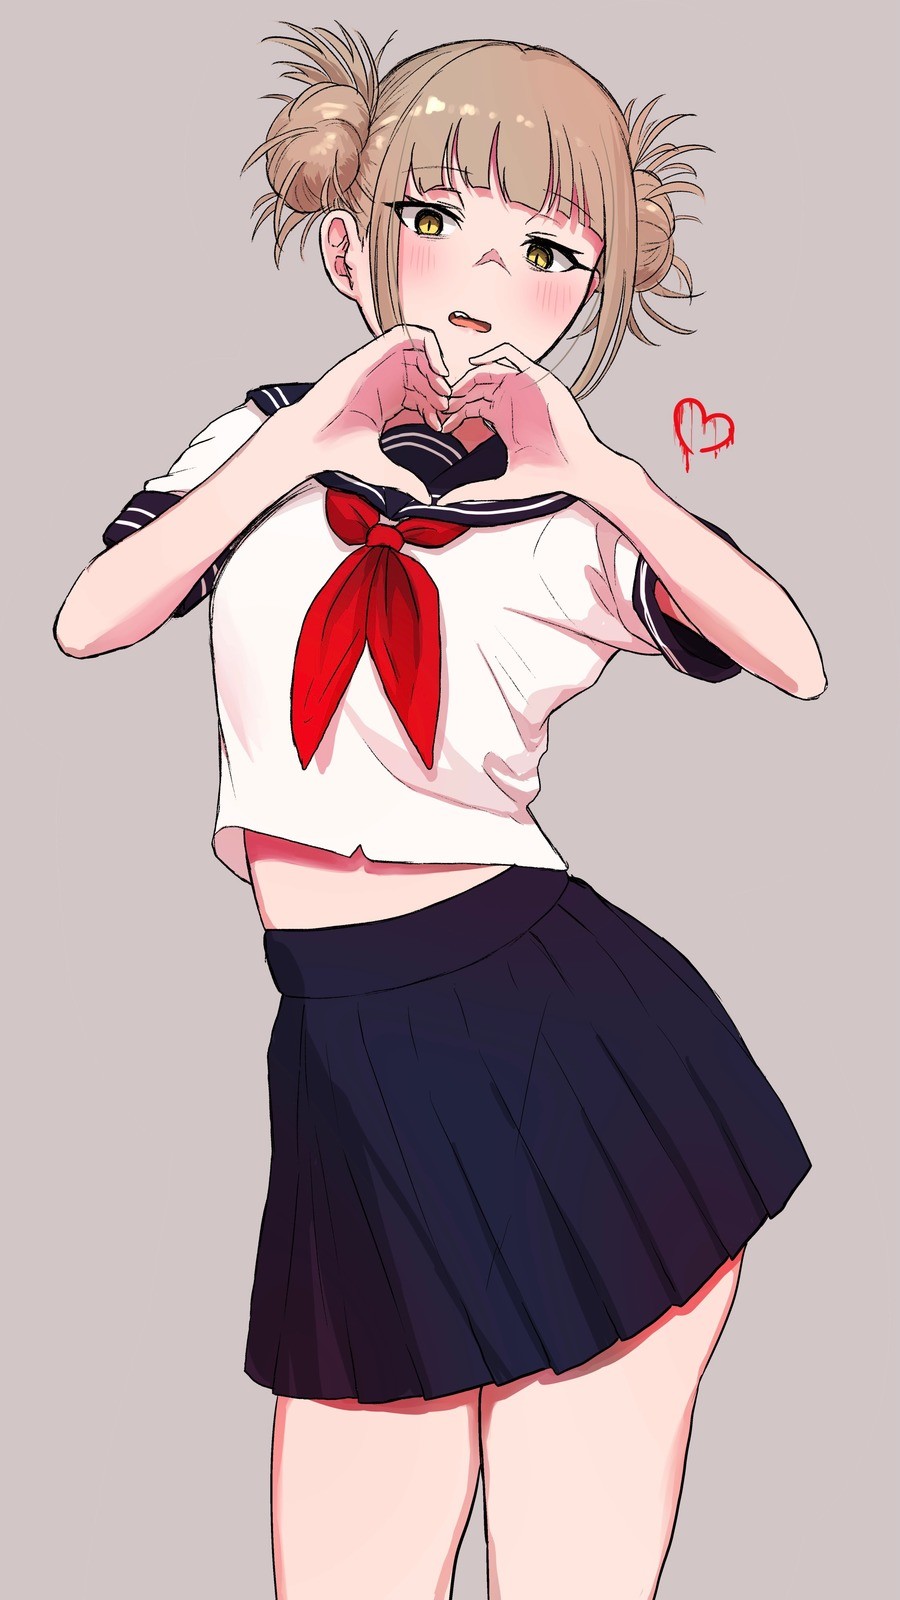 Daily Toga - 645: Toga Hearts you. join list: DailyToga (477 subs)Mention History Source: .. 